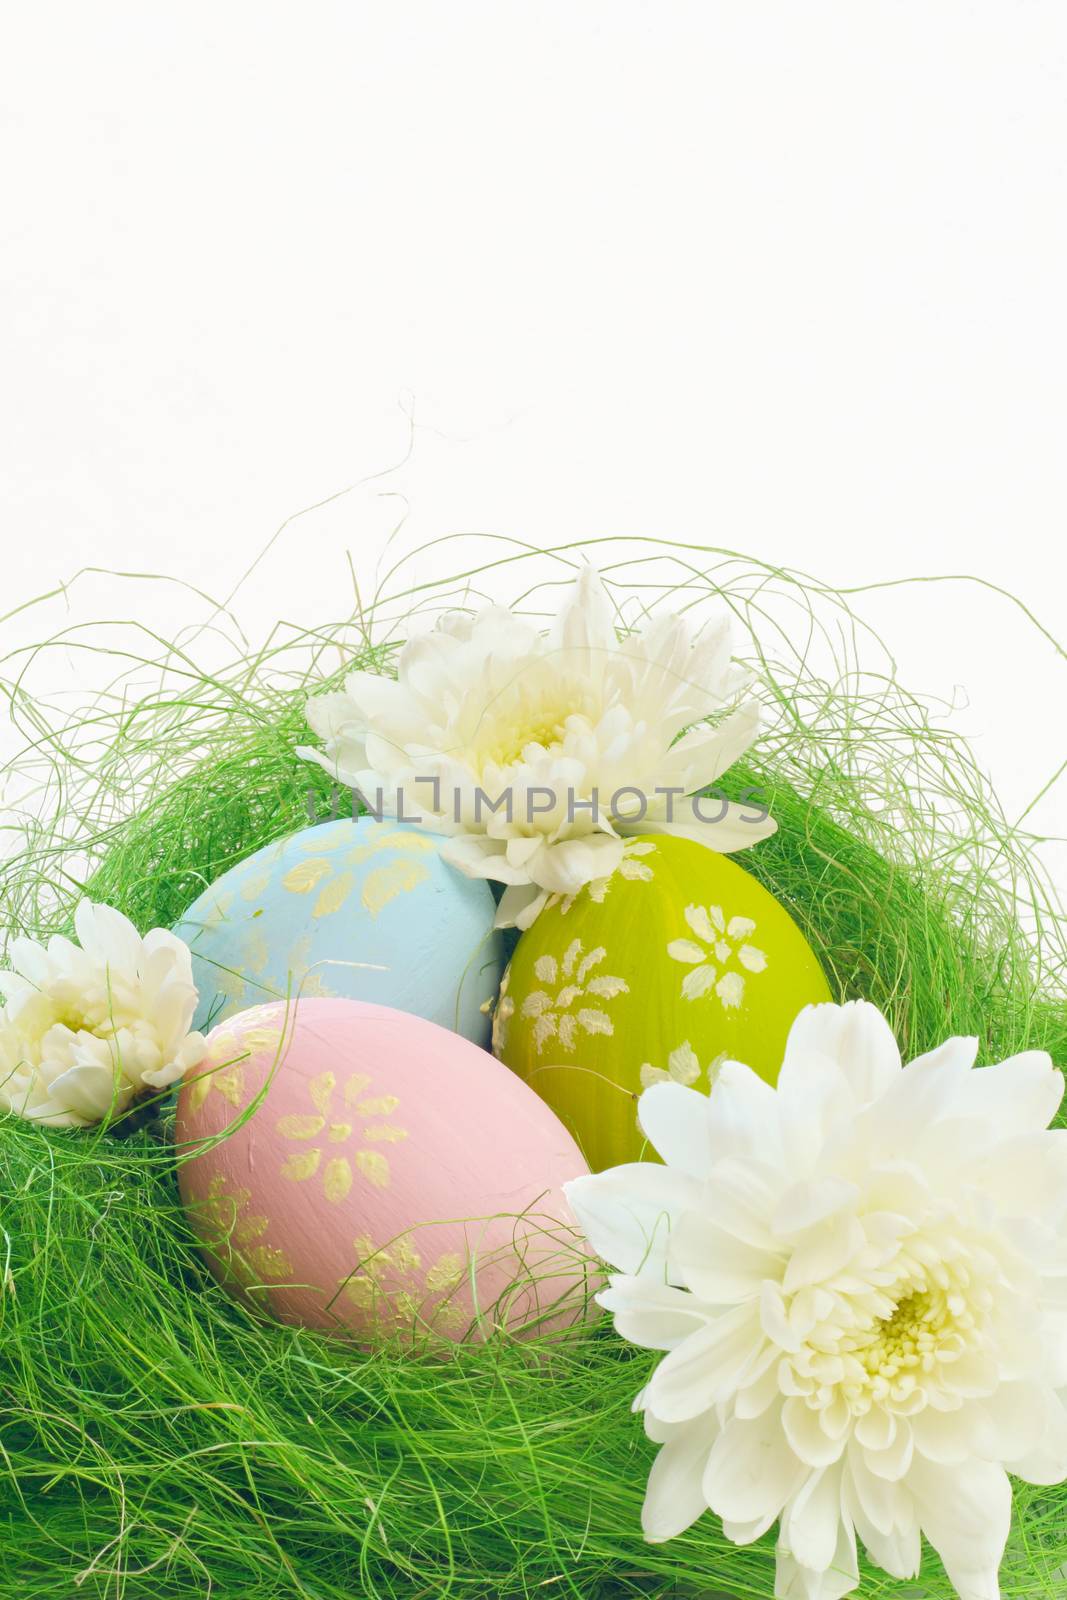 Easter card with chrysanthemums and eggs with copy space